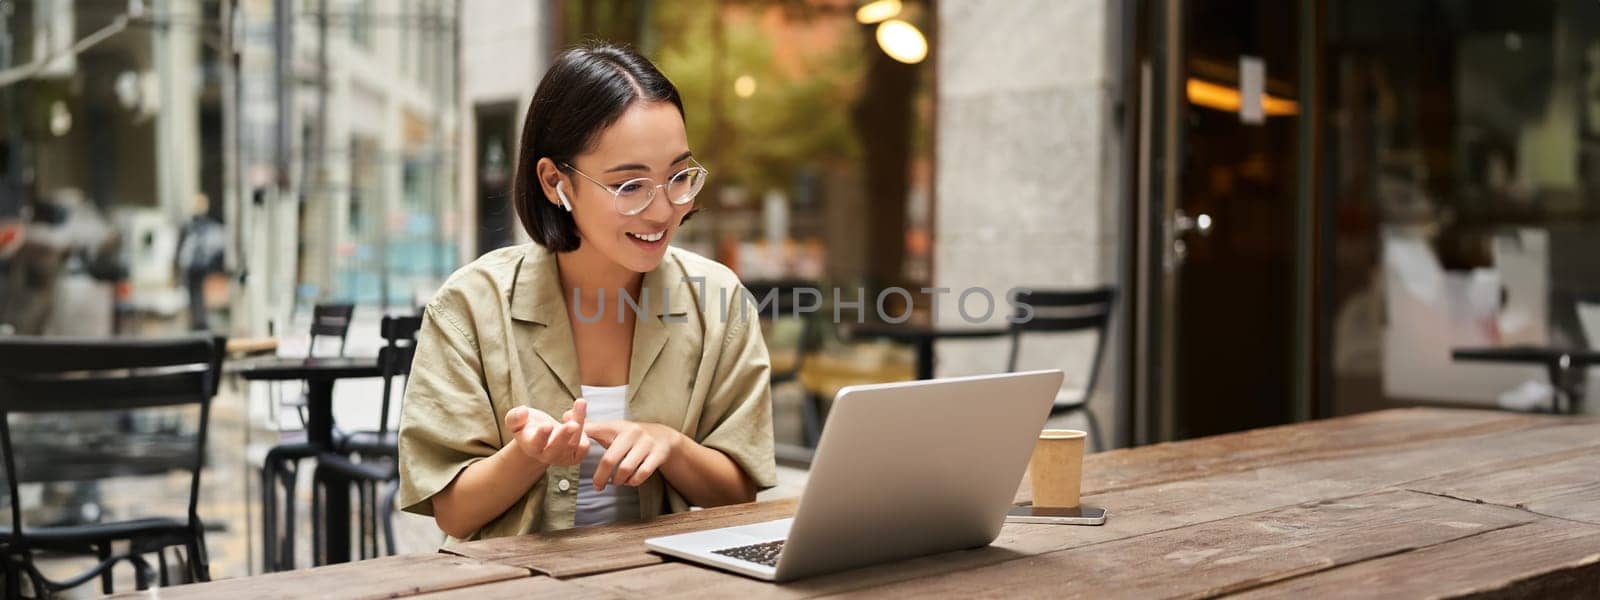 Young woman sitting on online meeting in outdoor cafe, talking to laptop camera, explaining something, drinking coffee. Digital nomad